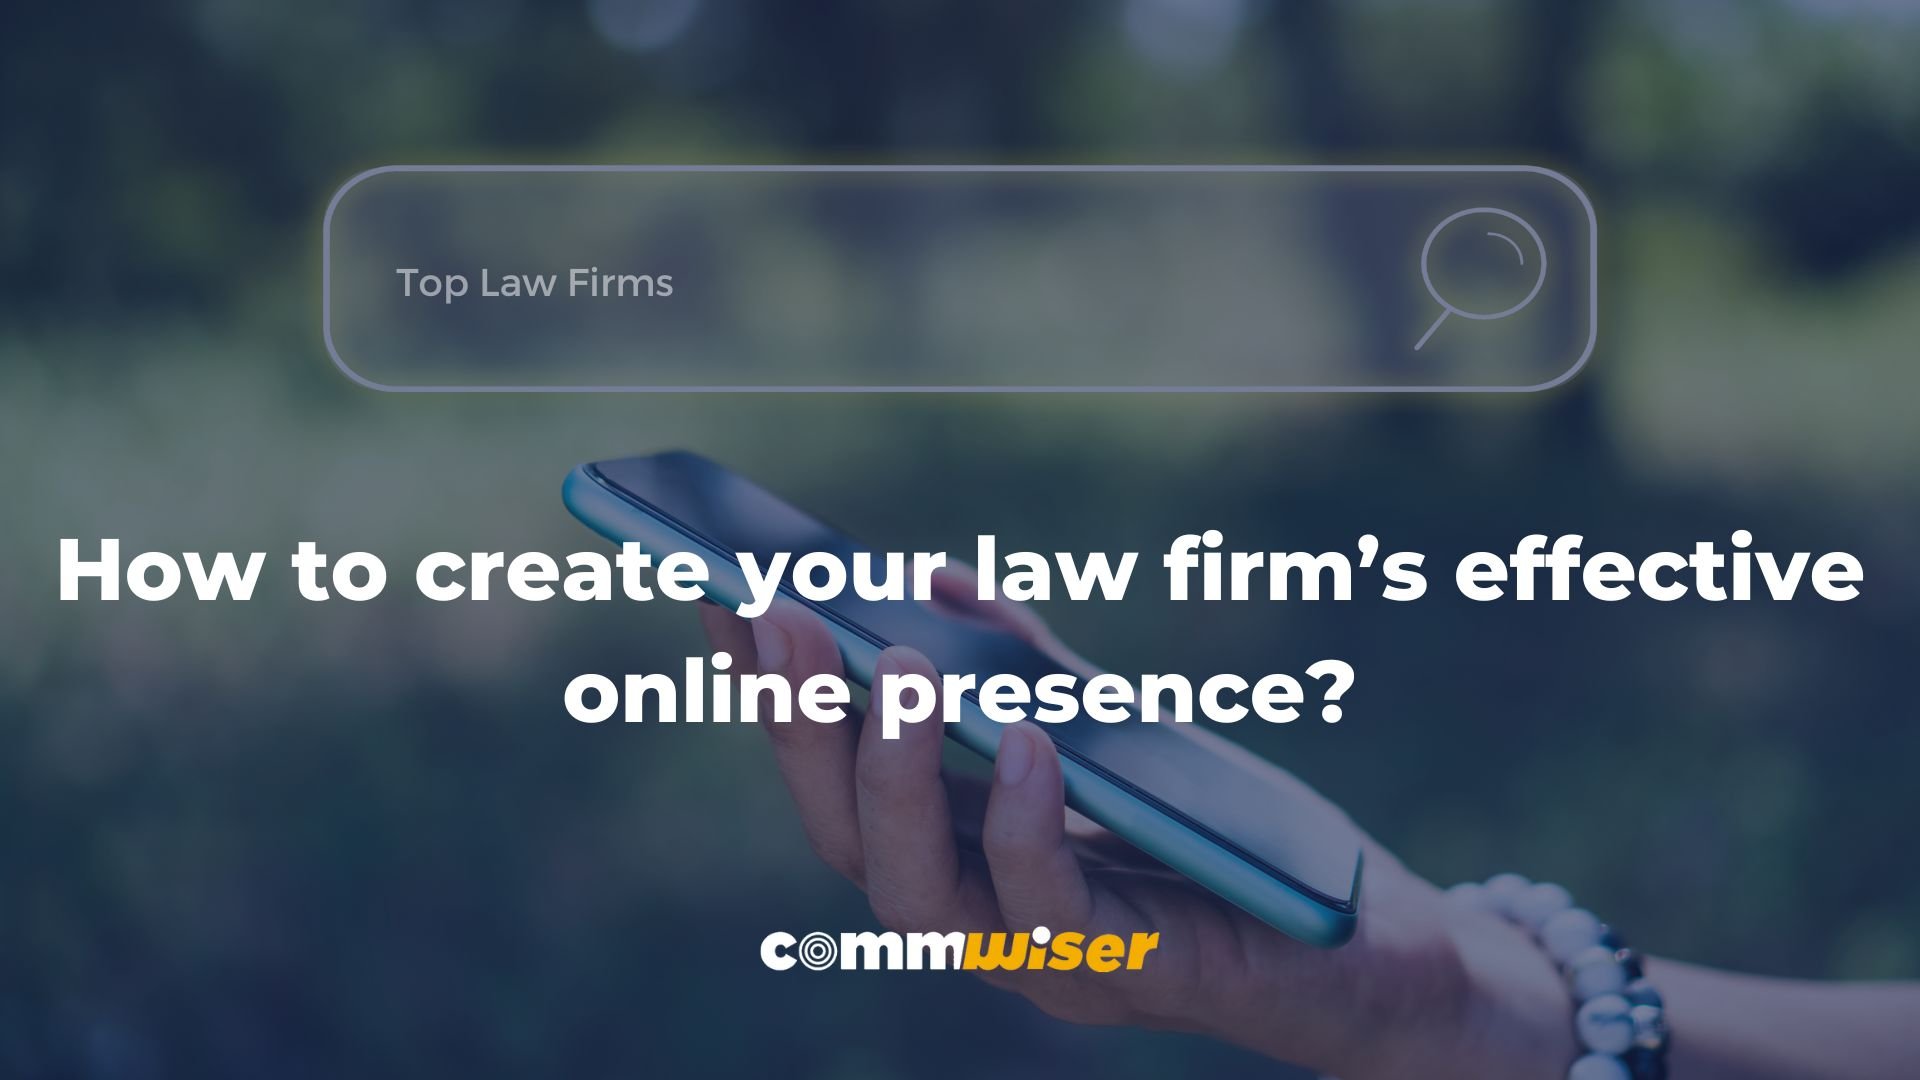 How to create your law firm’s effective online presence?